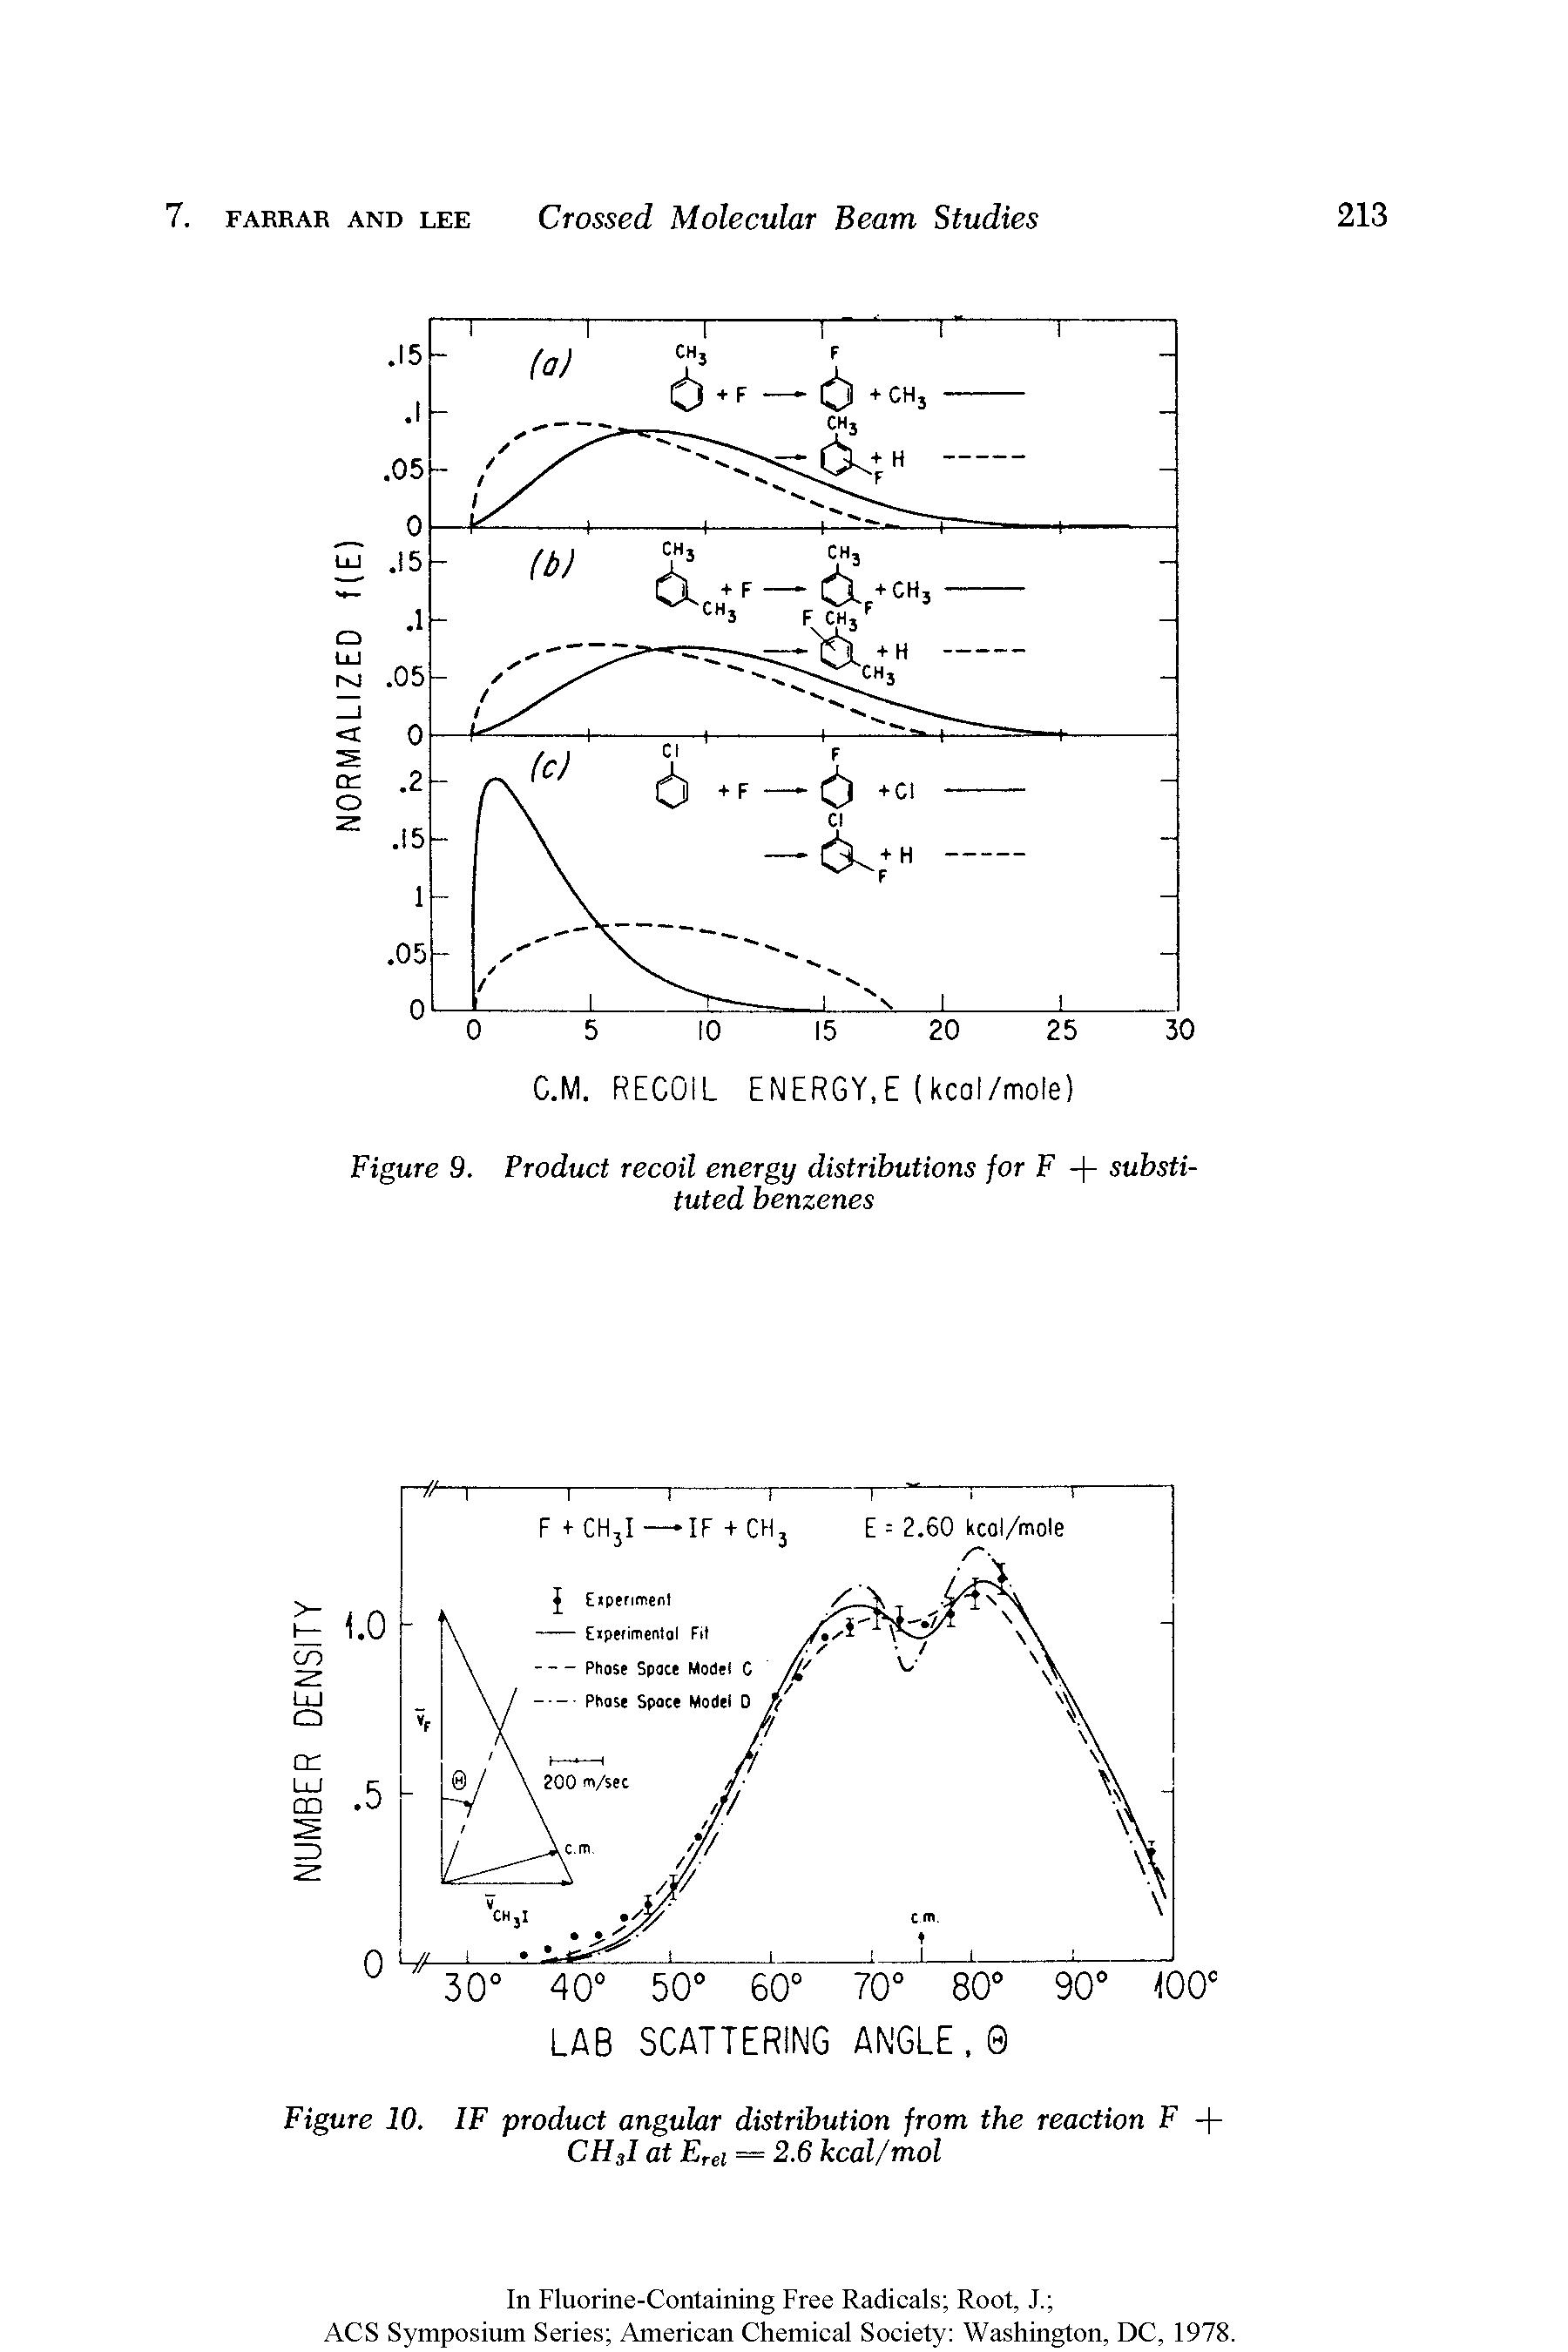 Figure 9. Product recoil energy distributions for F + substituted benzenes...